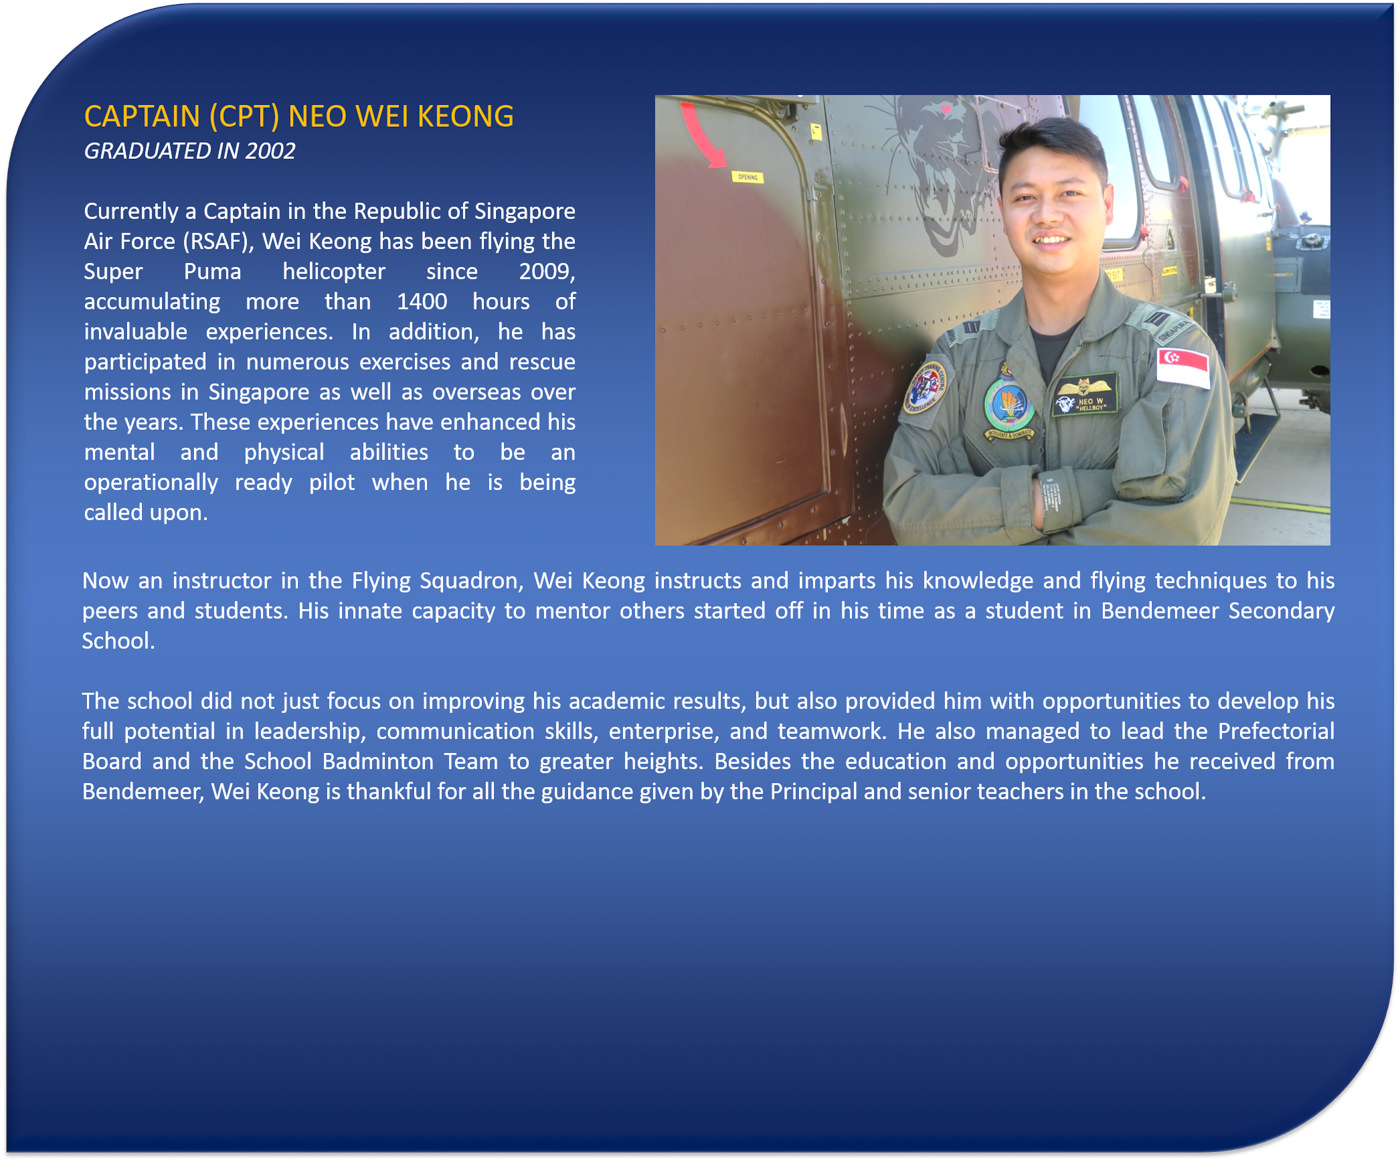 Captain (CPT) Neo Wei Keong